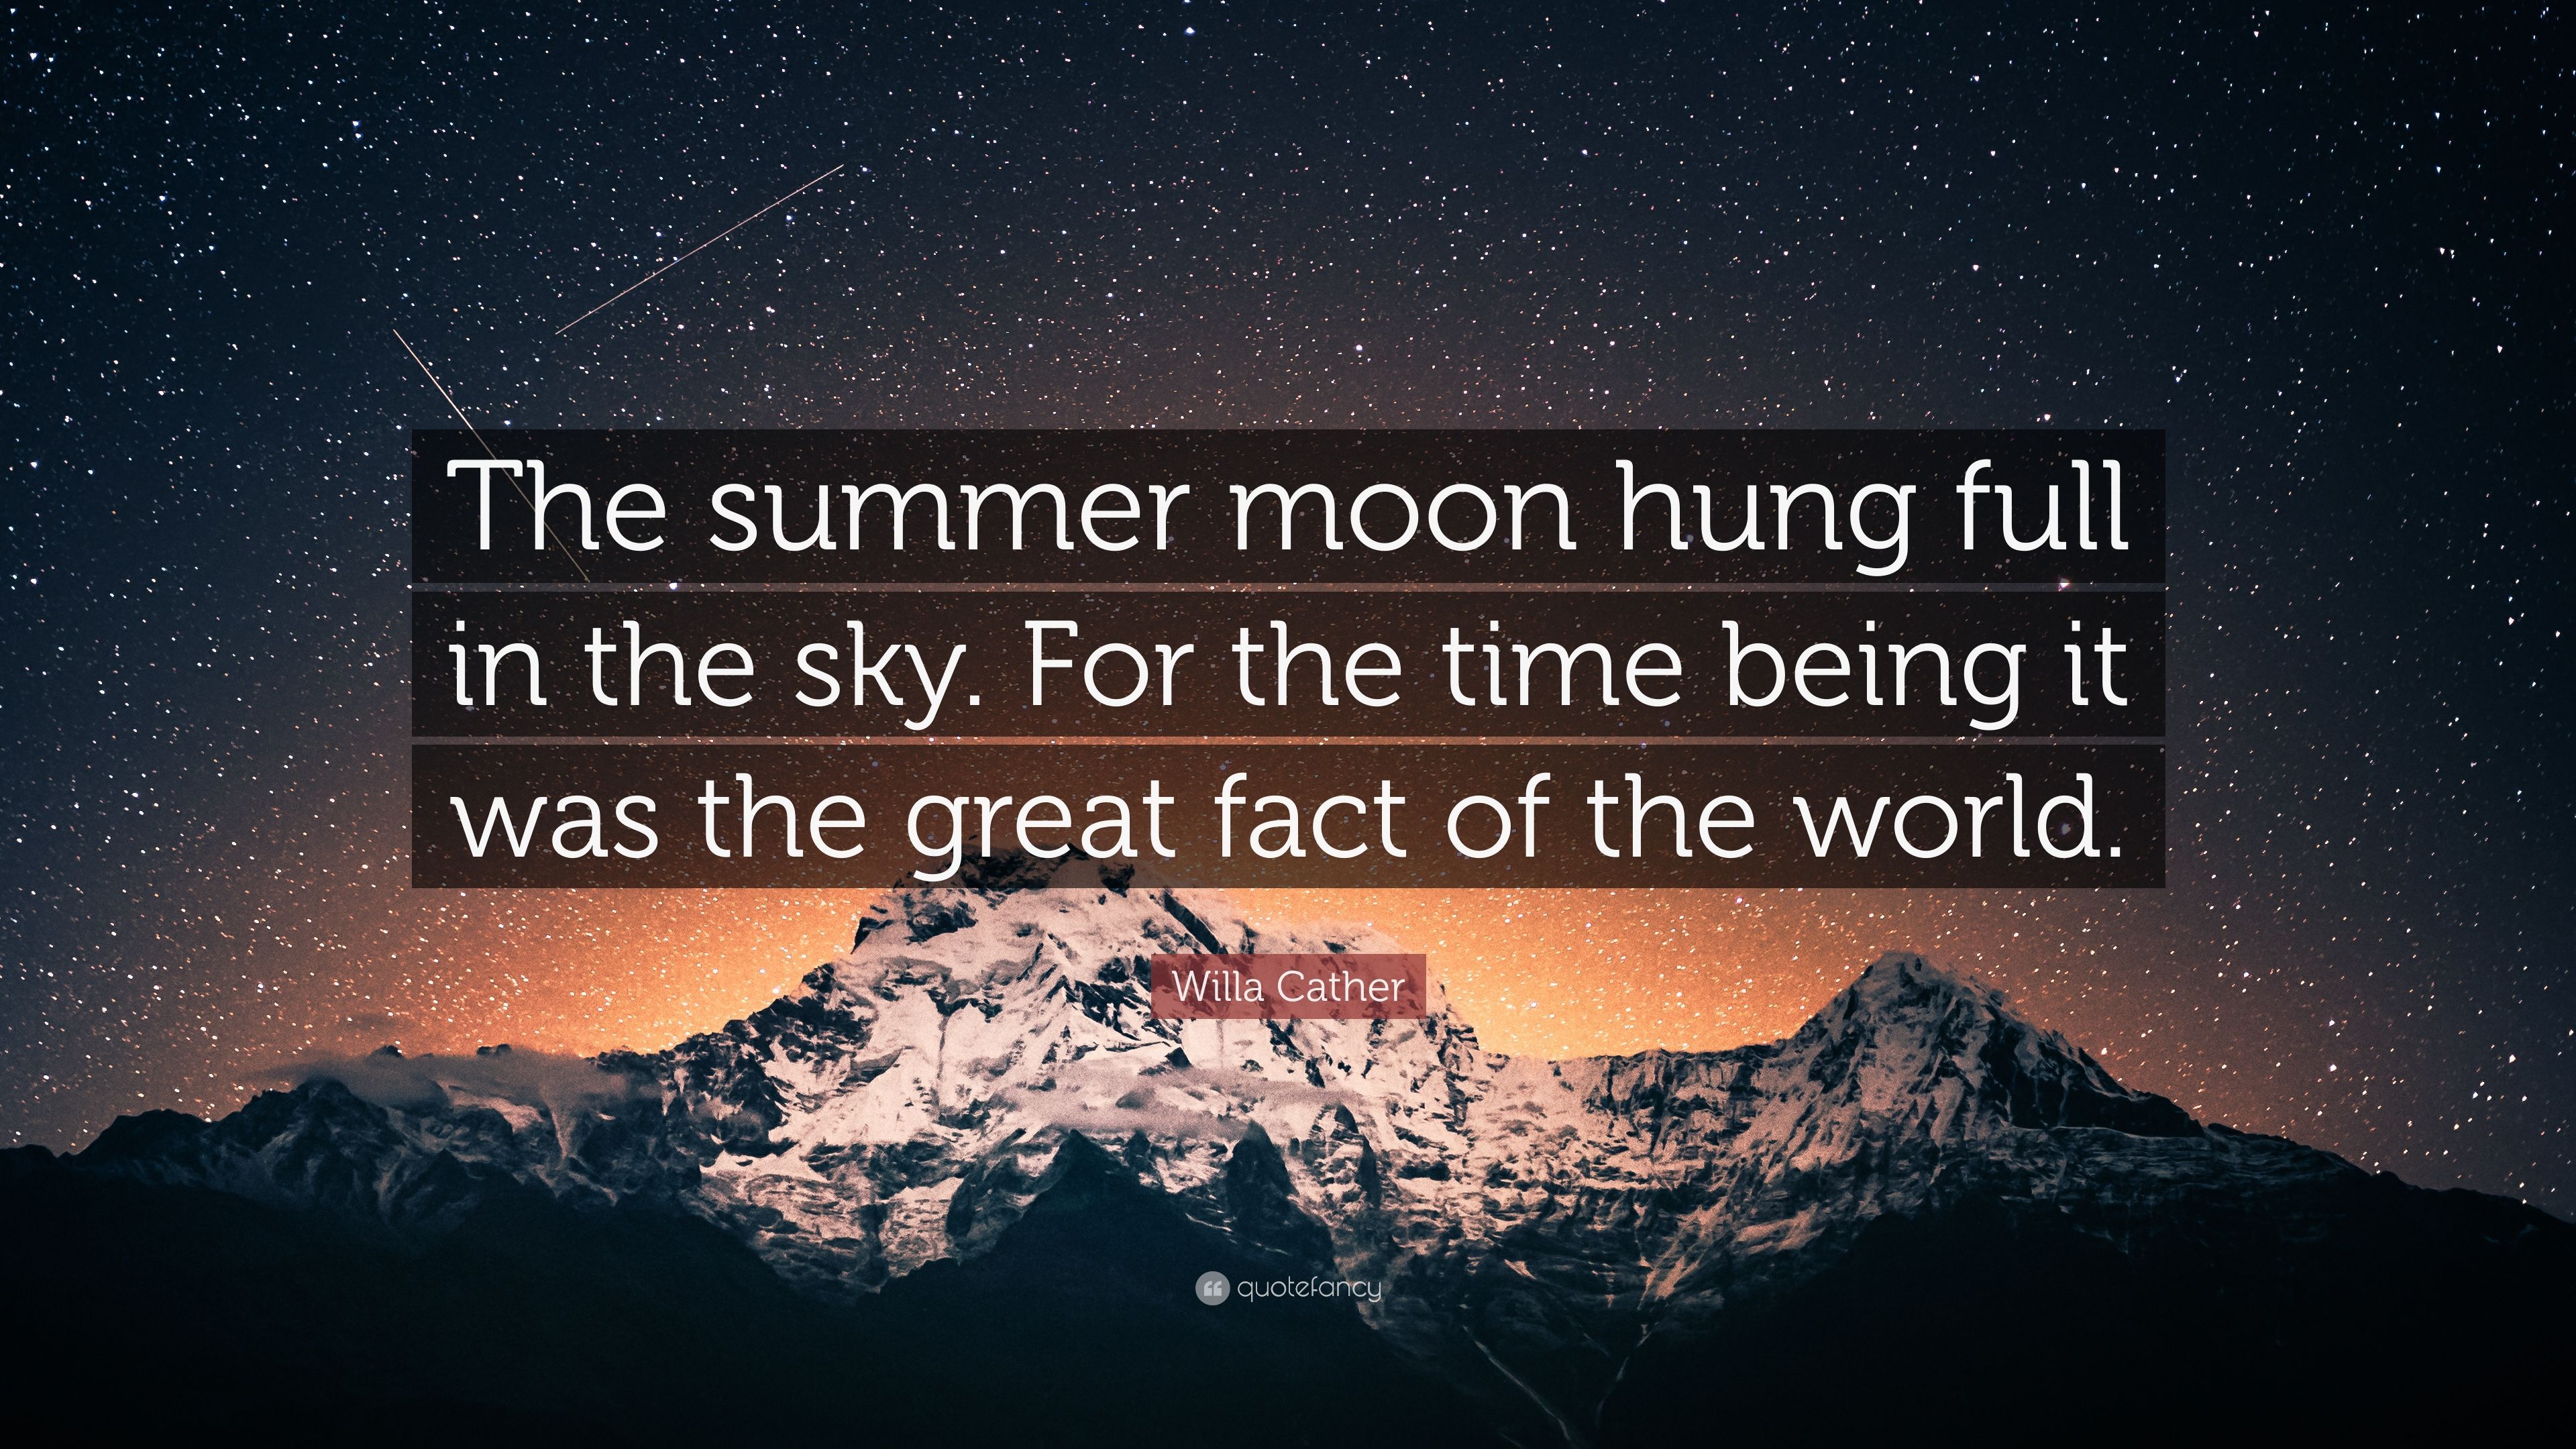 Willa Cather Quote: “The summer moon hung full in the sky. For